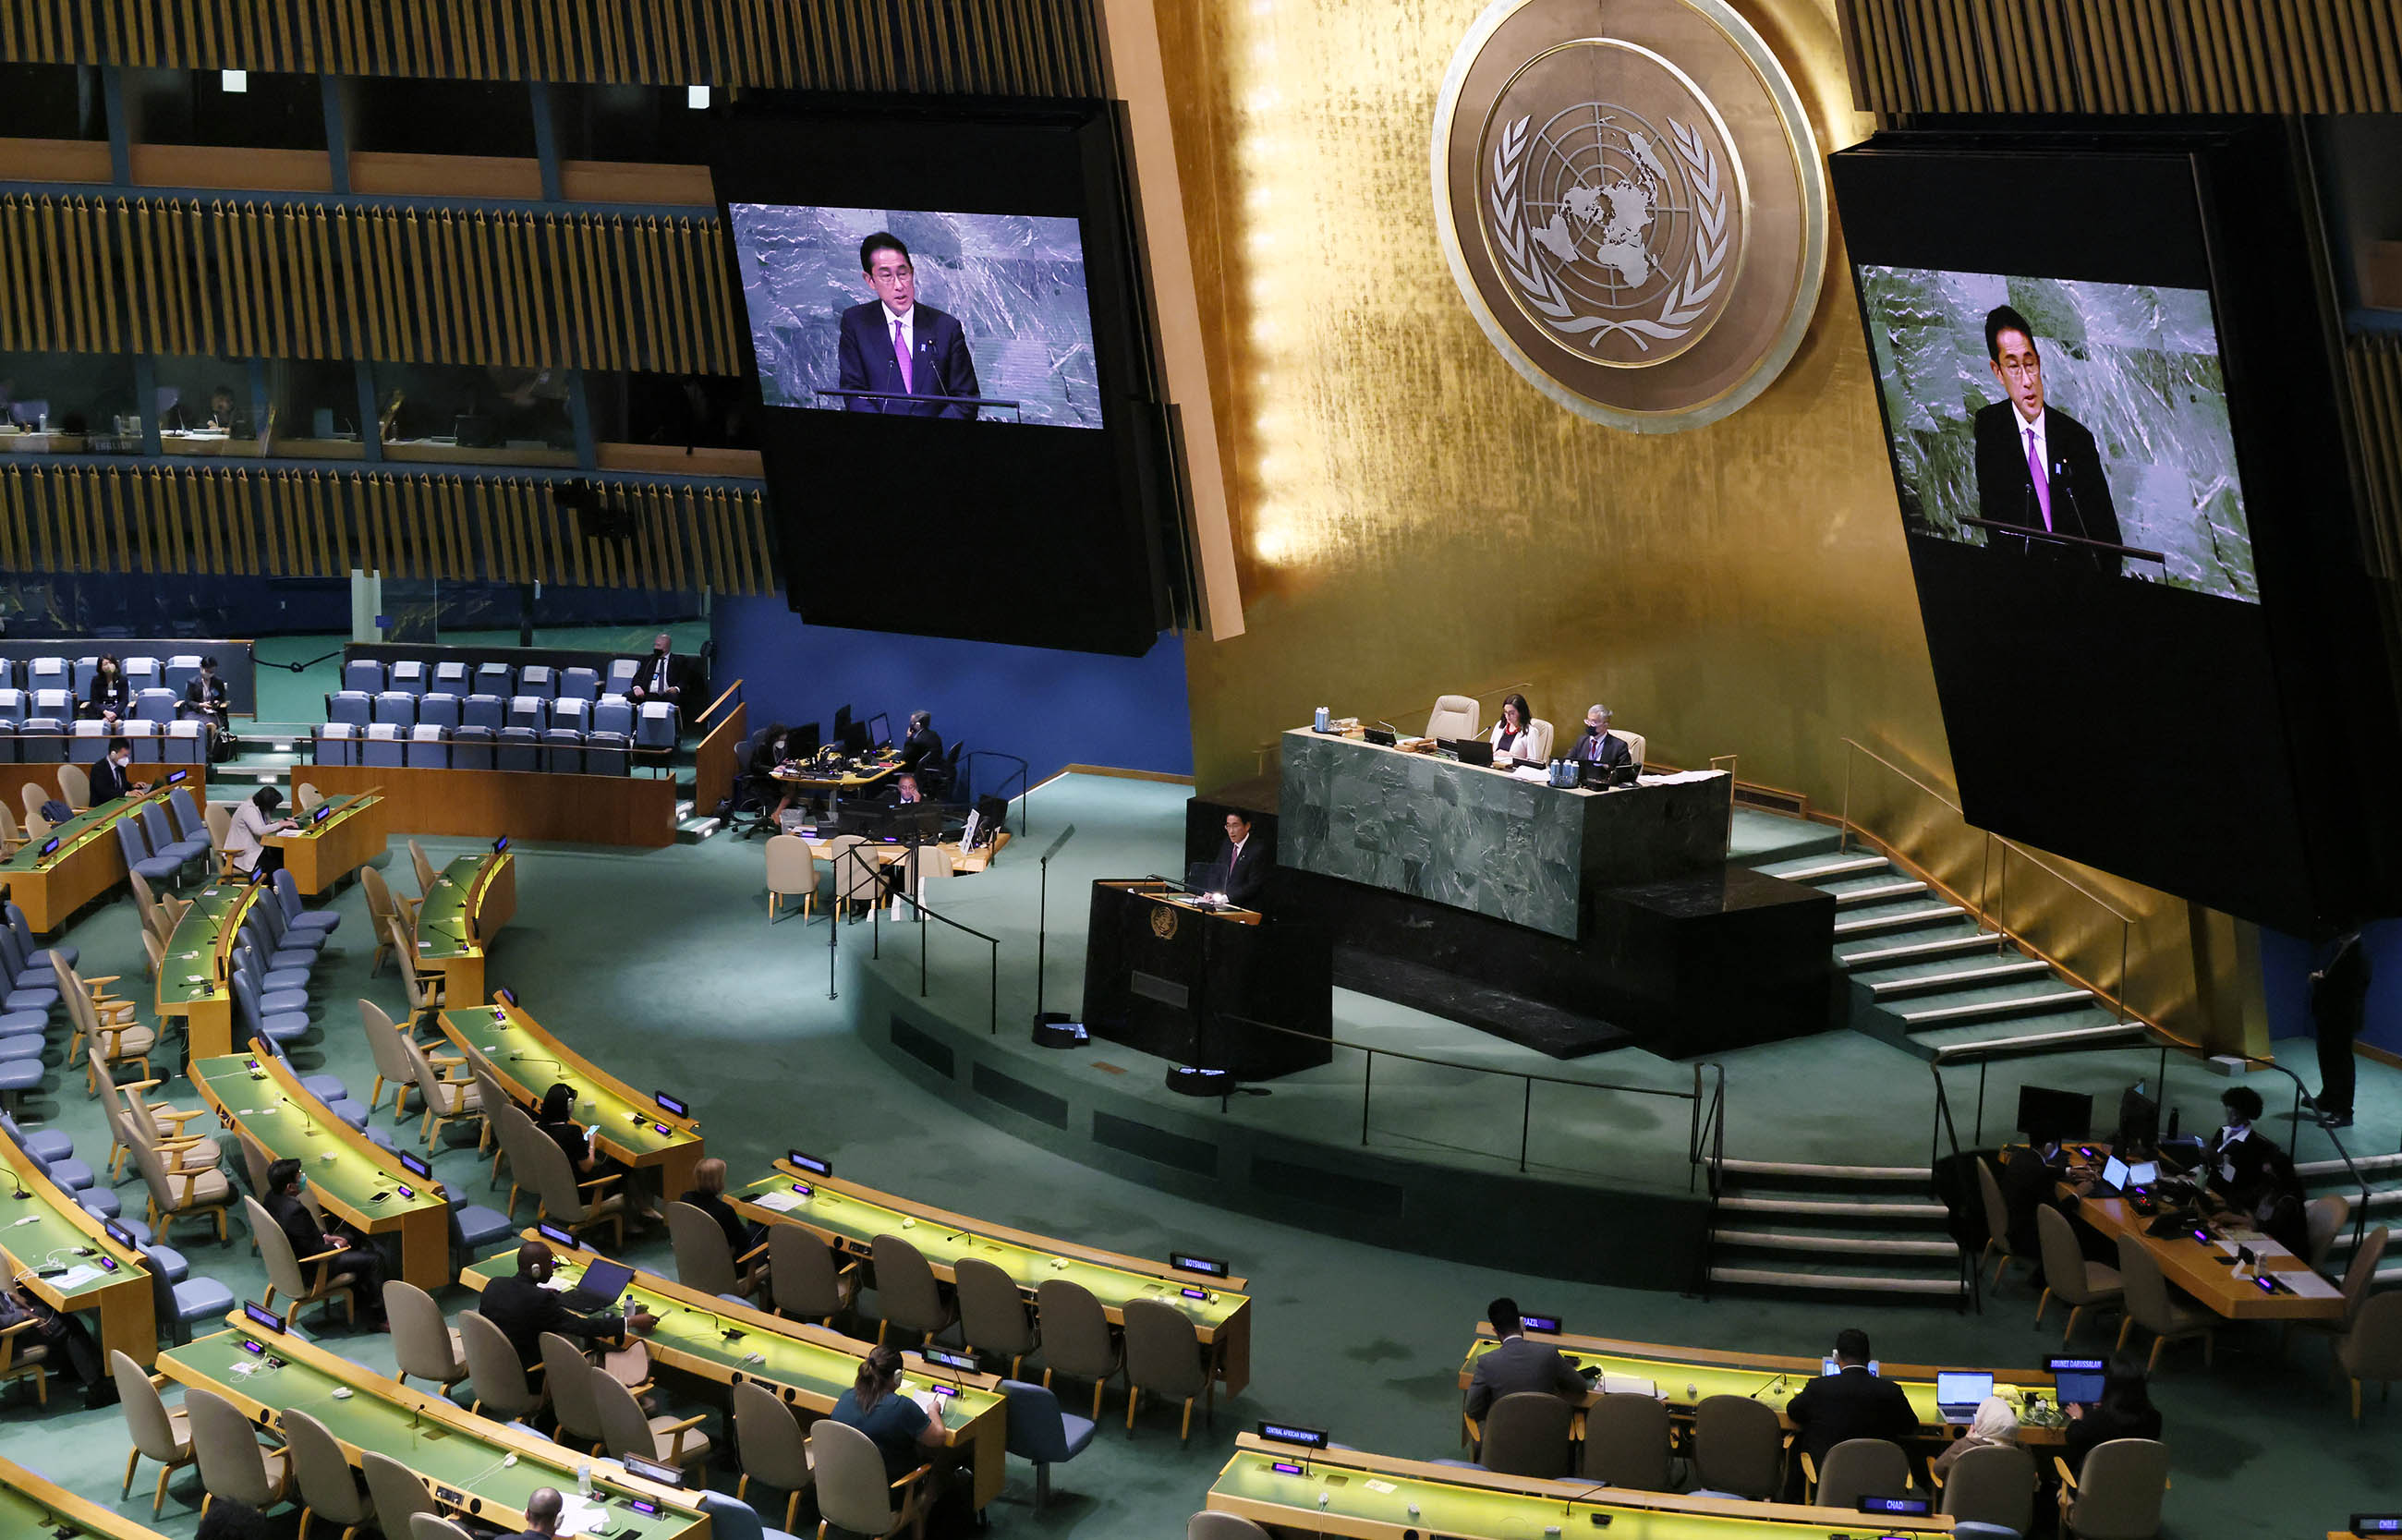 Photograph of the Prime Minister delivering an address at the United Nations General Assembly (3)